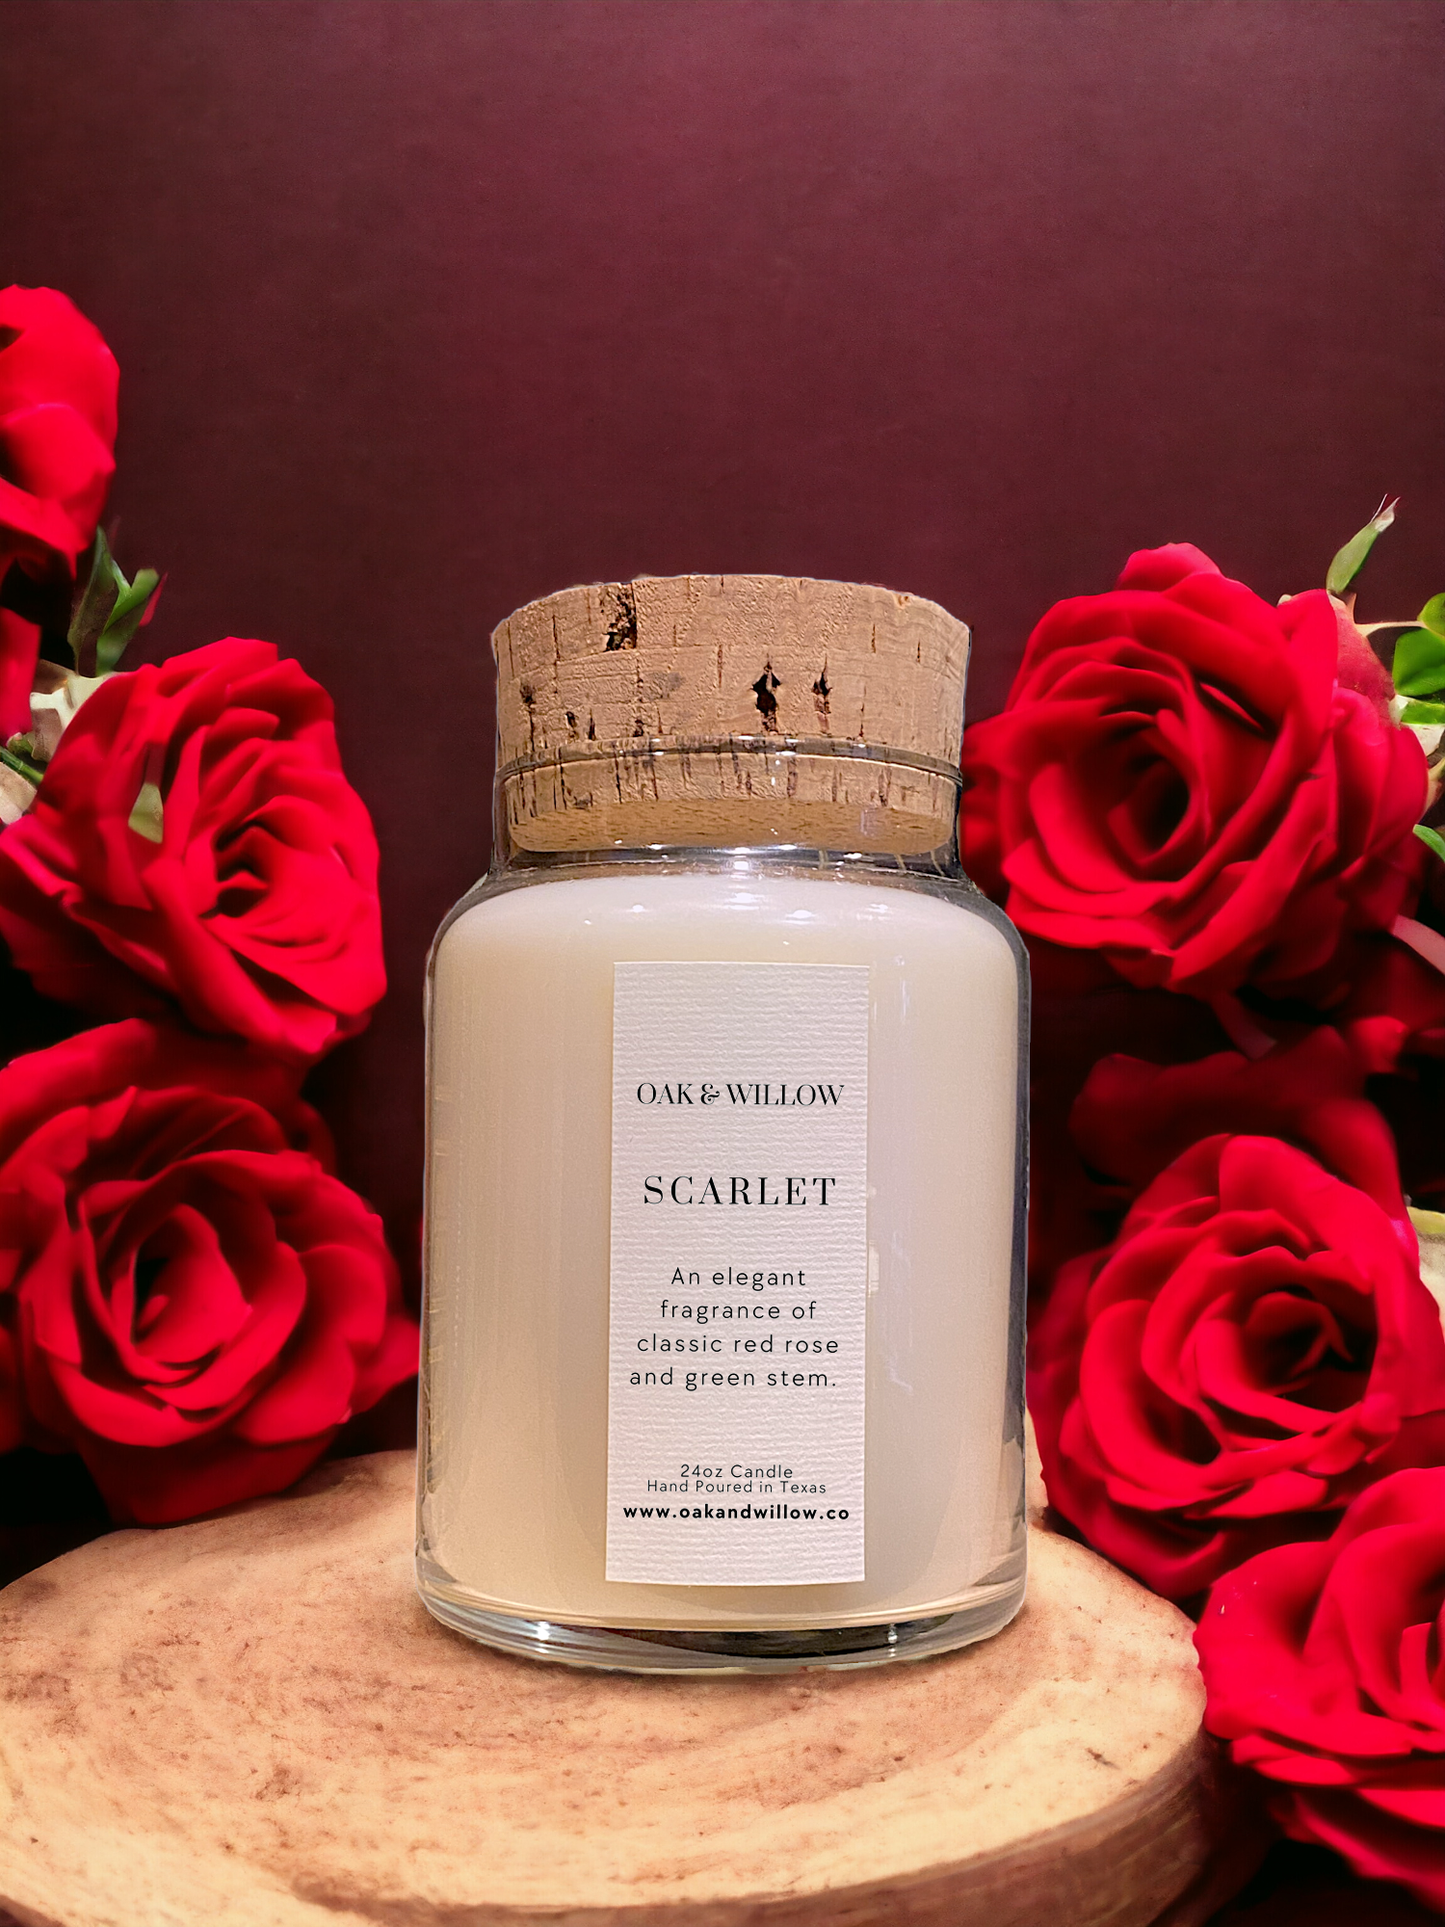 Scarlet 24oz Natural Cork Apothecary Candle - An elegant fragrance of classic red rose and green stem.